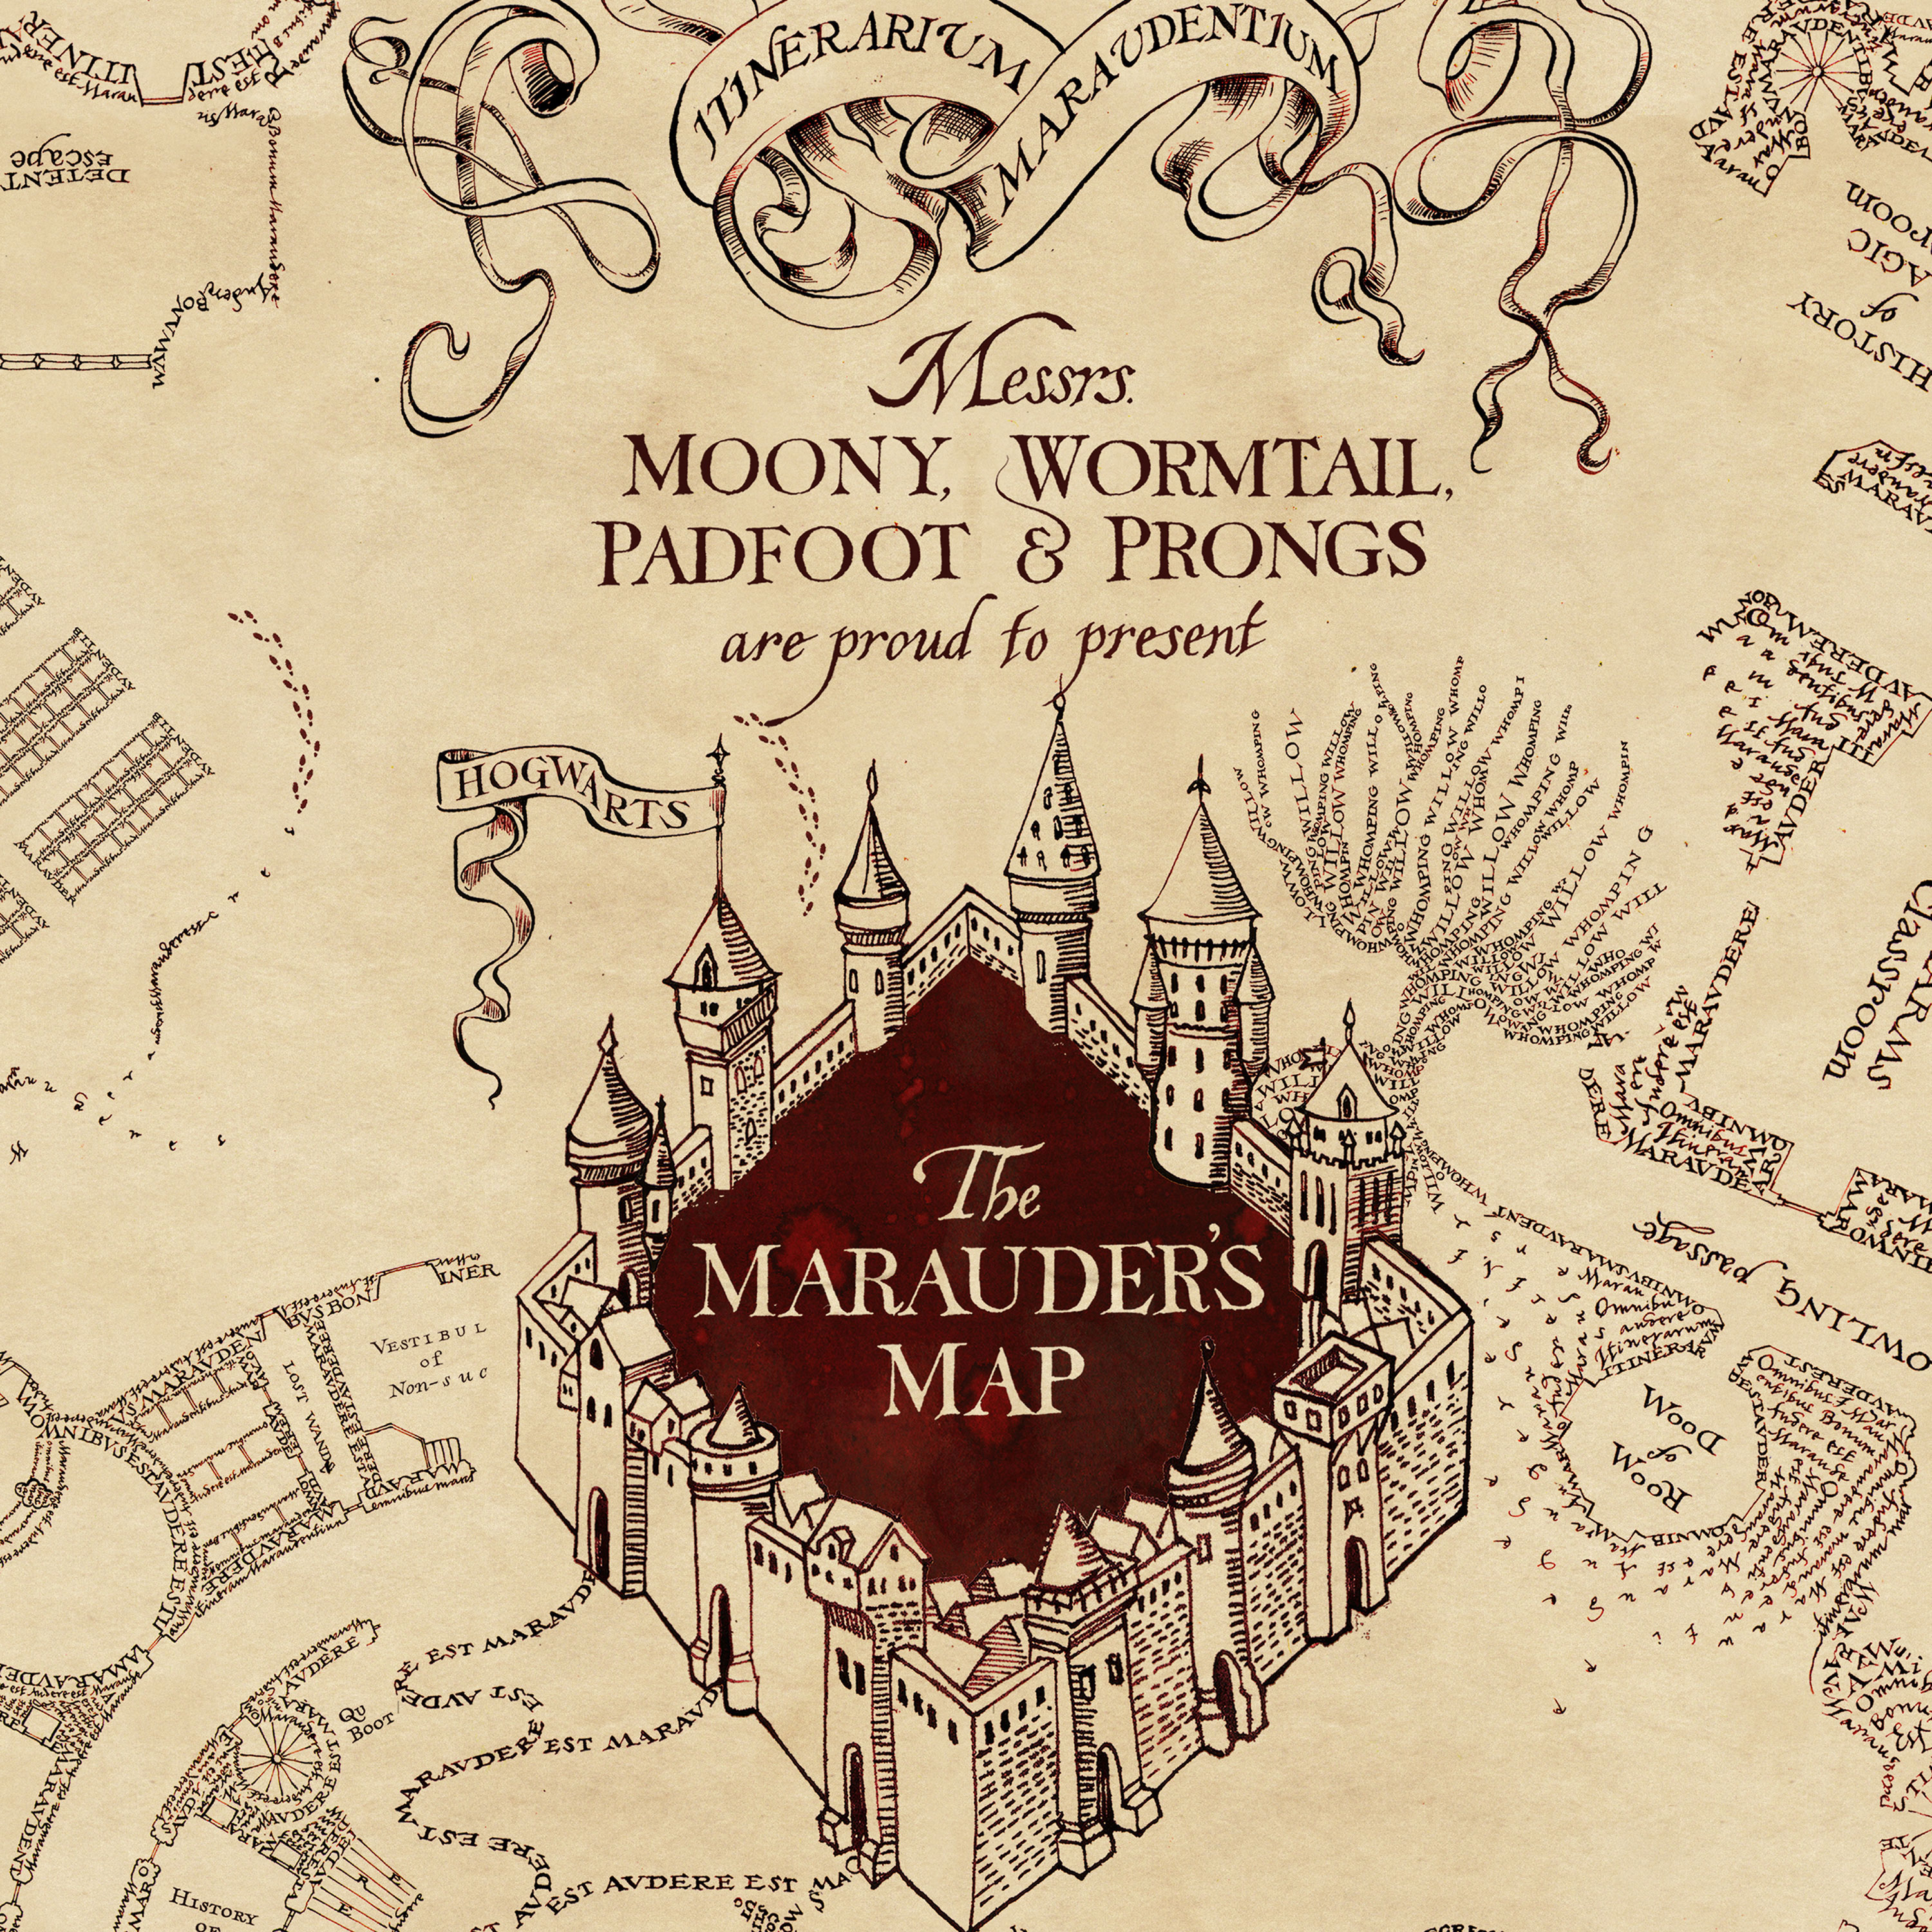 Harry Potter Wallpapers Marauders Map.